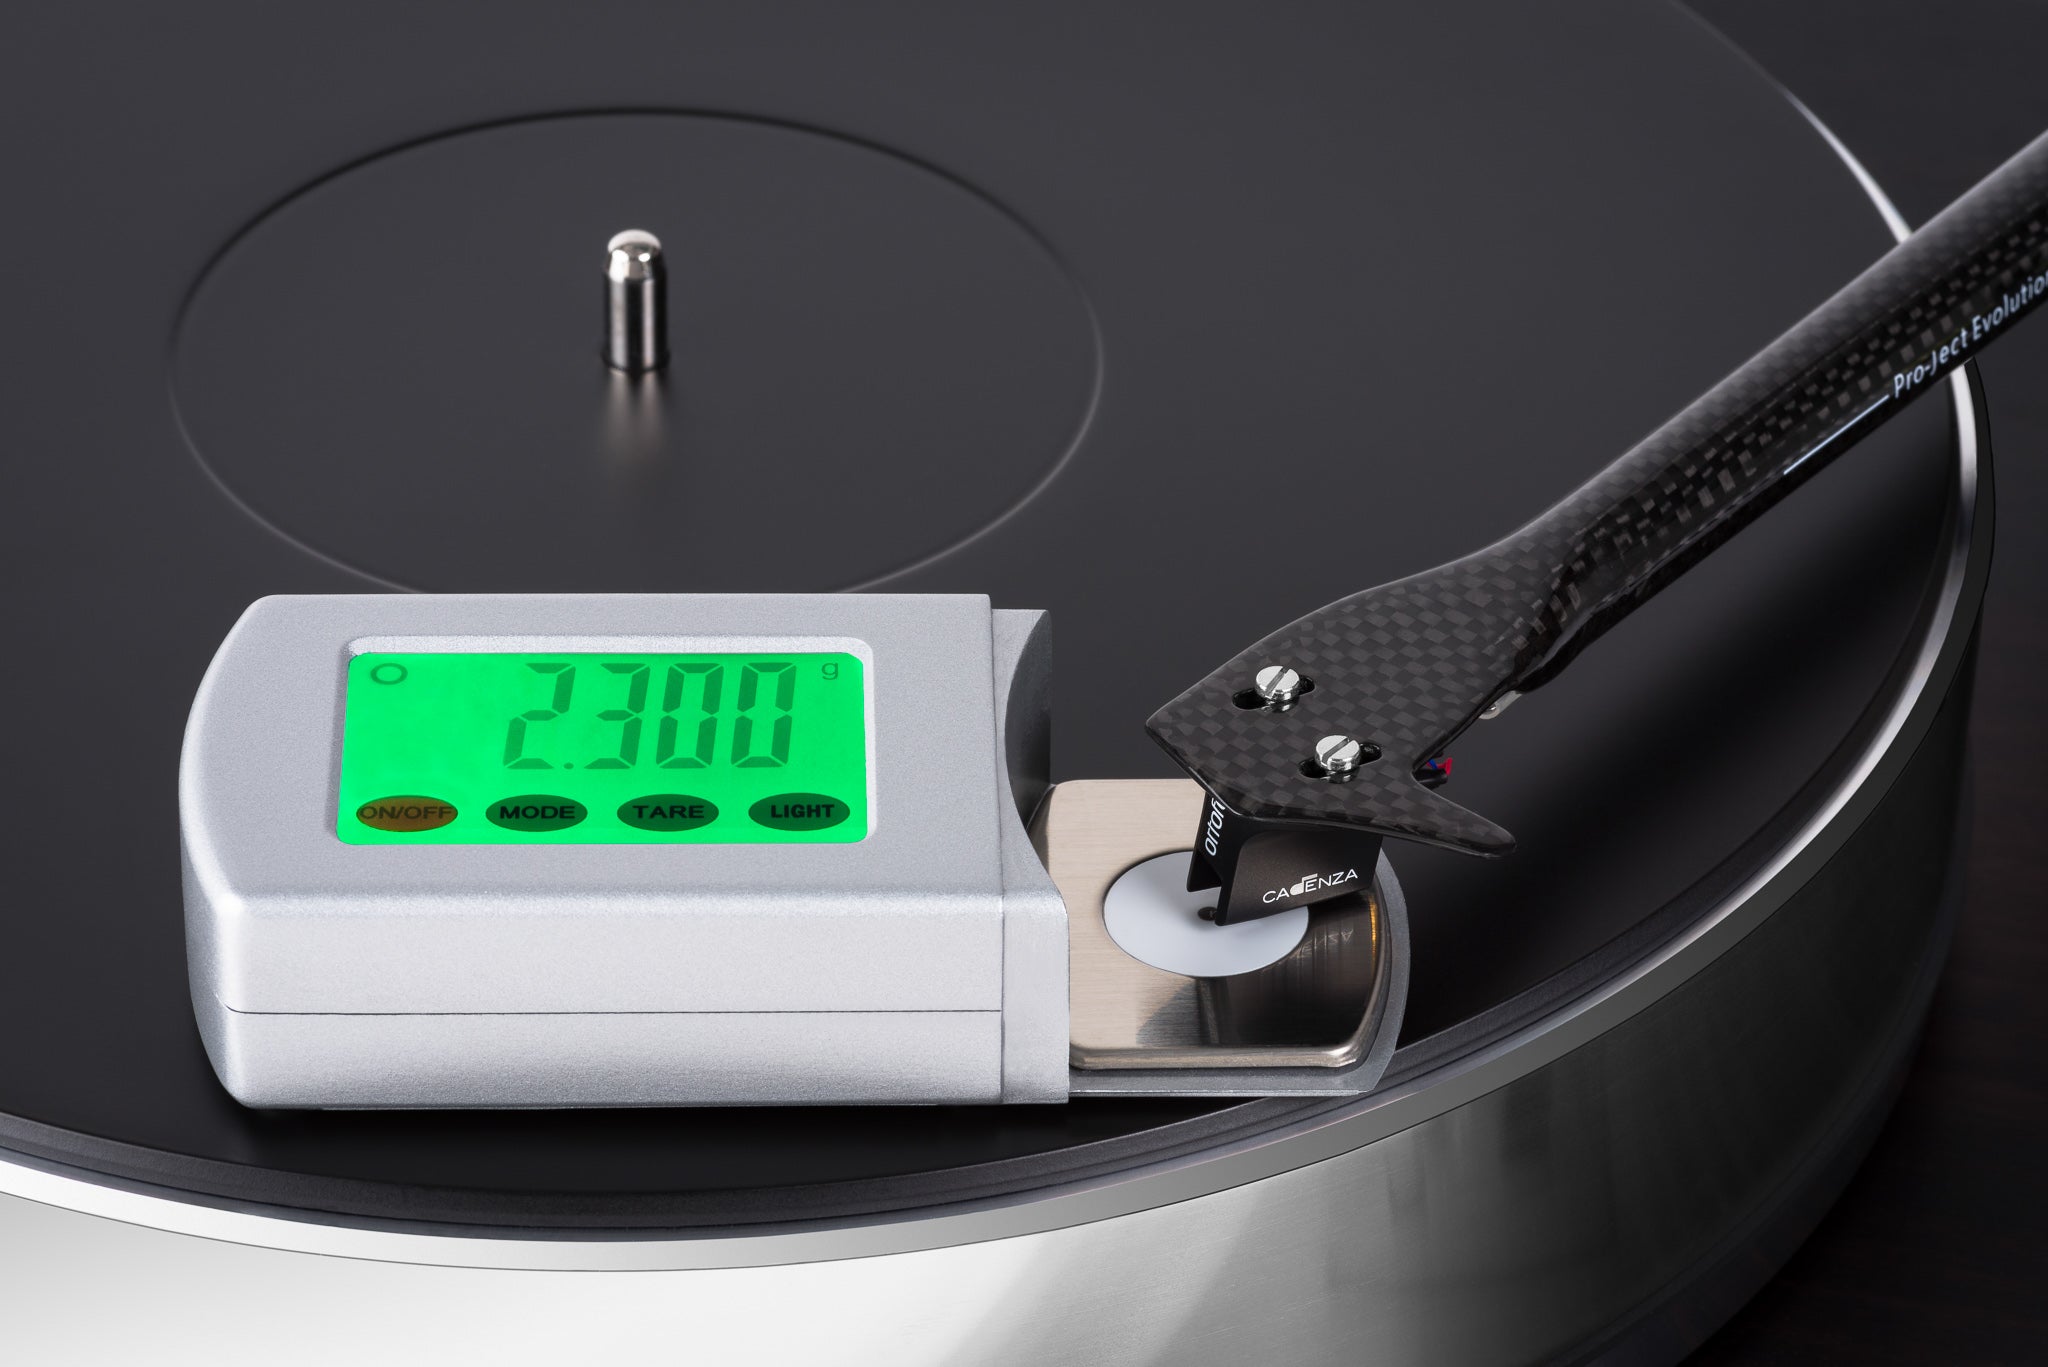 Pro-Ject Measure It S2 needle weight scale